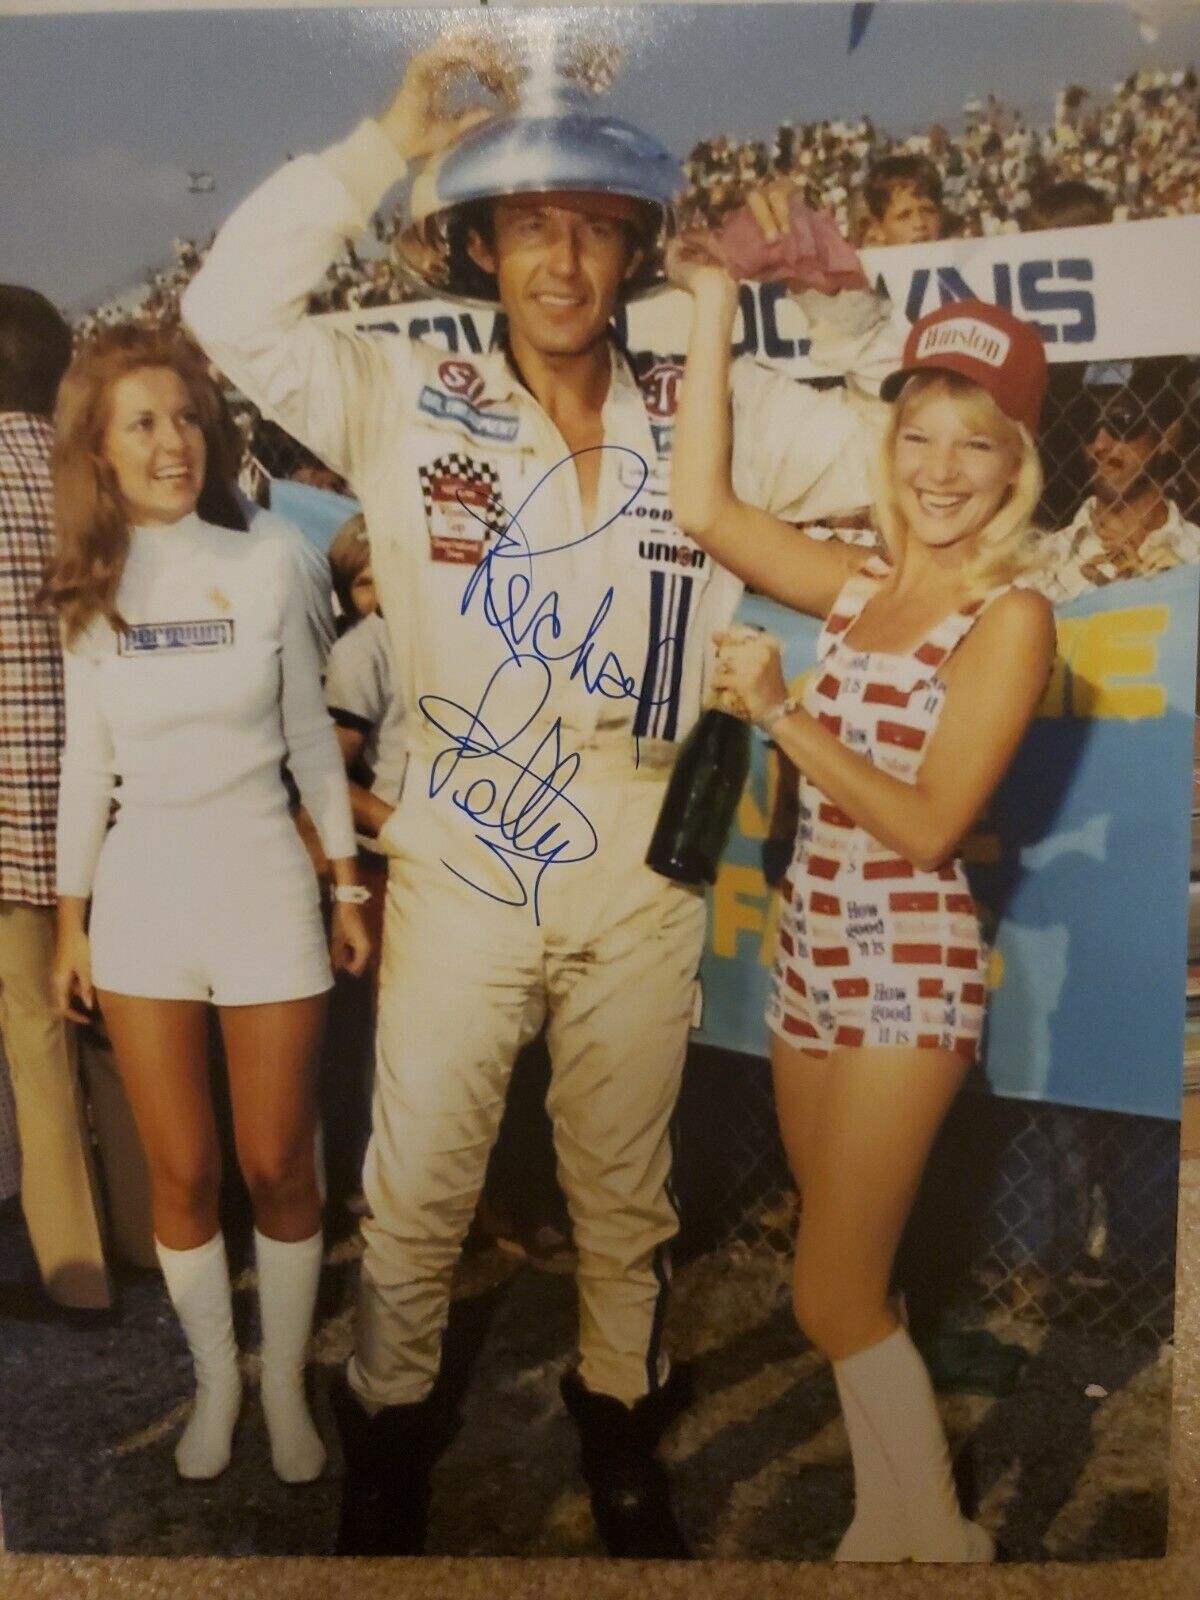 RICHARD PETTY HAND SIGNED 8x10 Photo Poster painting AUTOGRAPHED NASCAR RACING